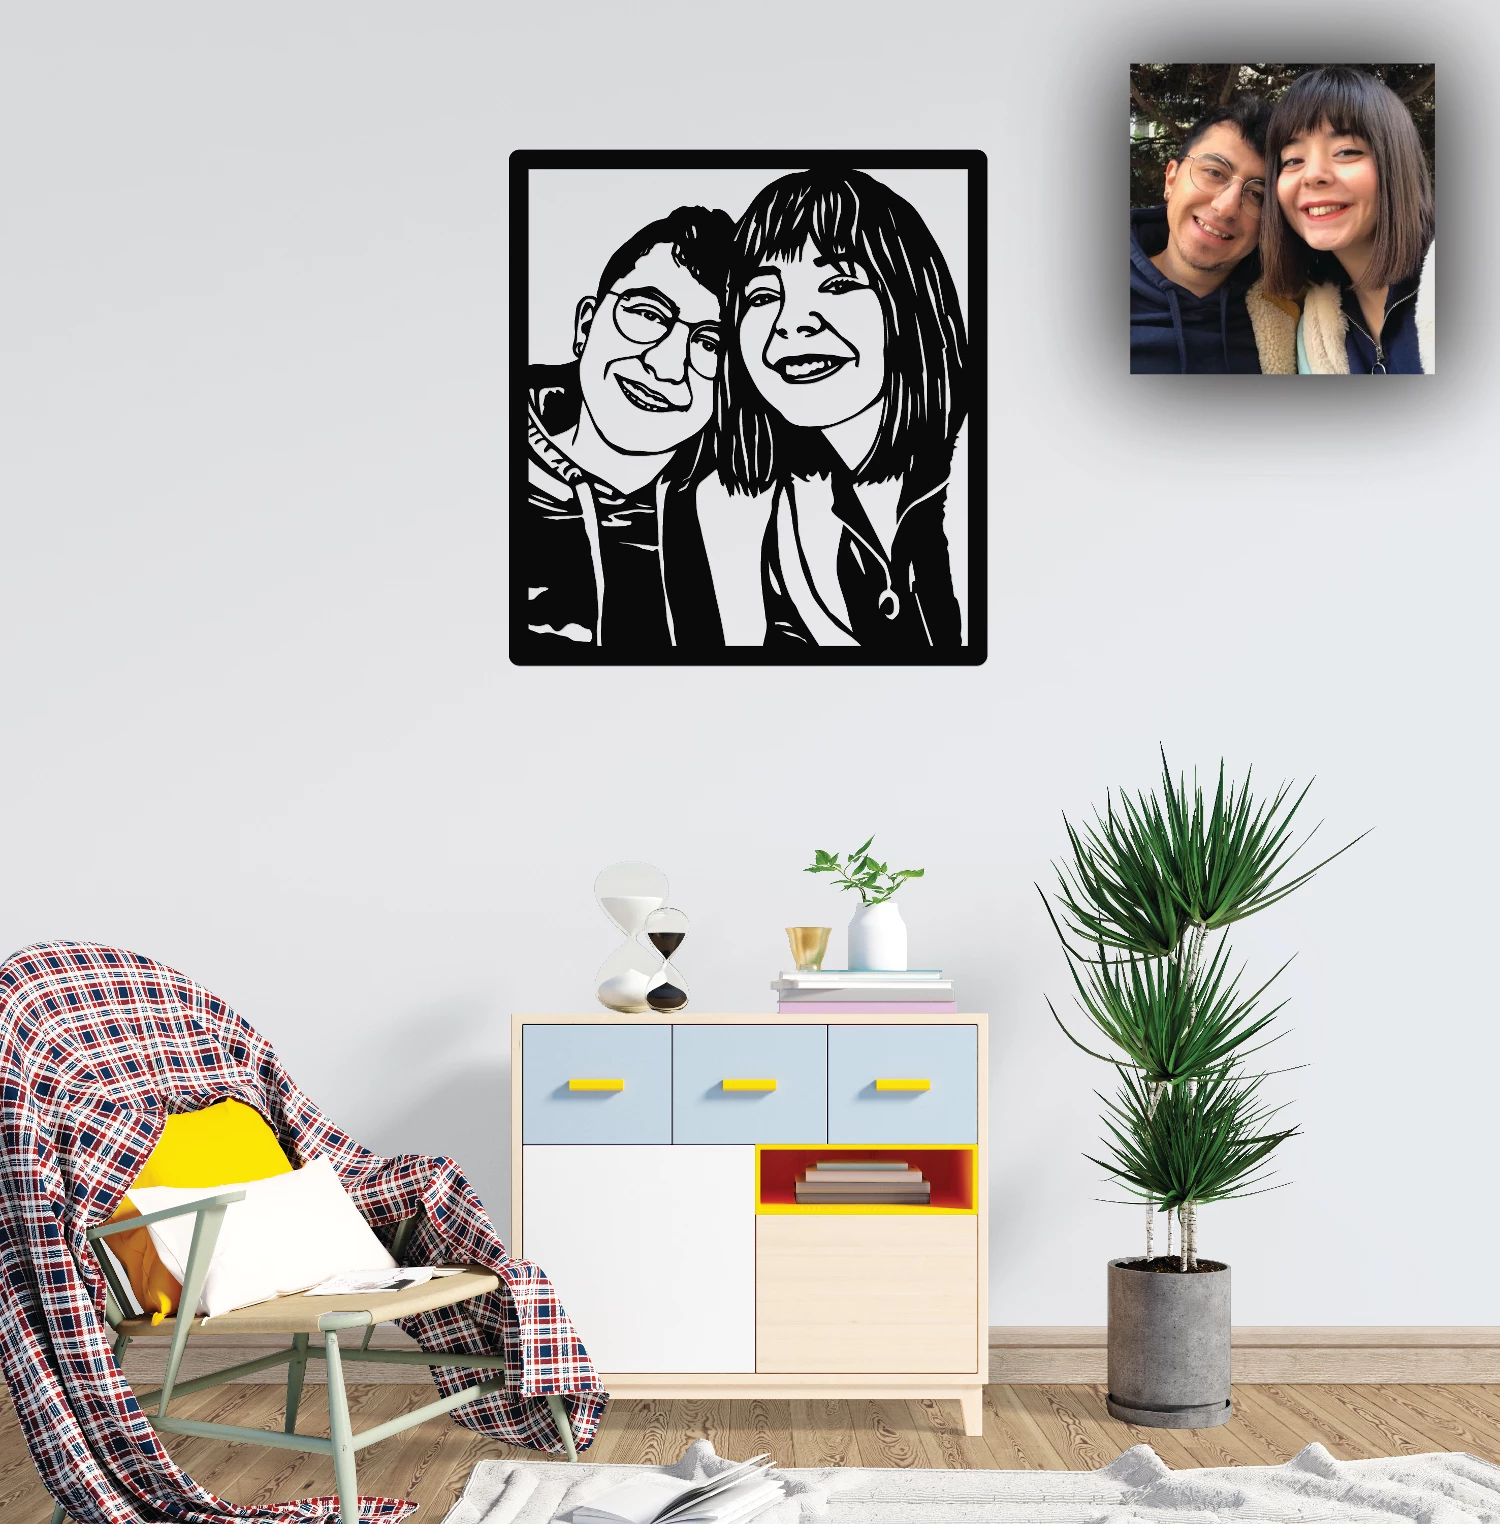 WISH3 Personalized Metal Wall Art Framed Portrait Painting Custom Drawing Wall Decor Table Chart Picture Tableau.jpg Q90.jpg